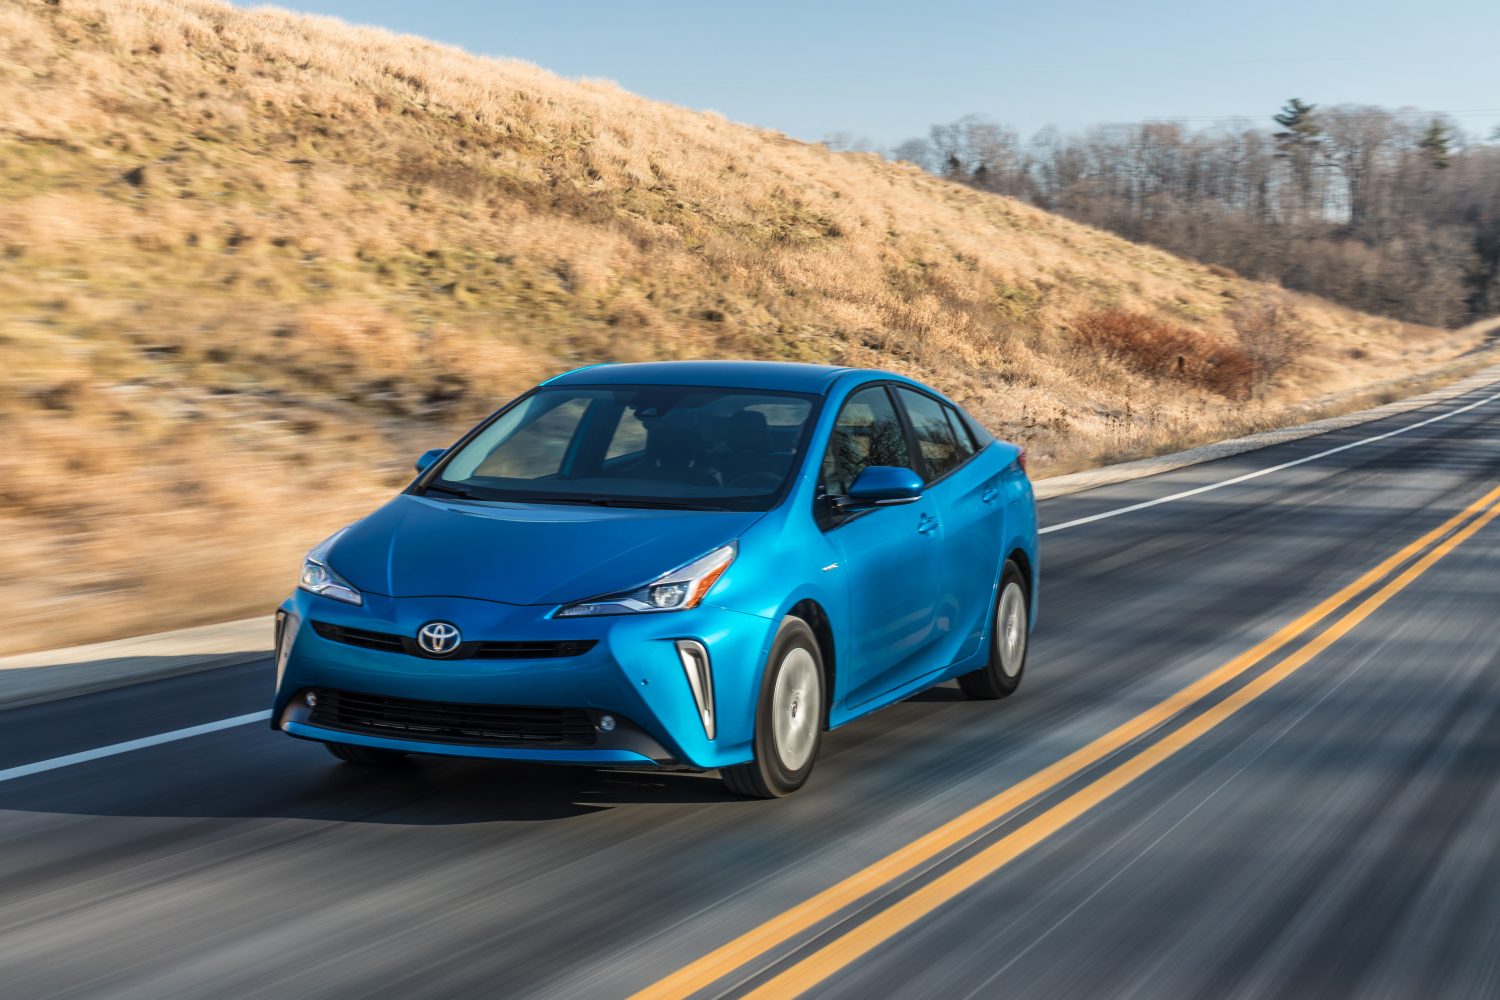 Toyota plans solid-state battery debut in a hybrid by 2025—future Prius?Toyota plans solid-state battery debut in a hybrid by 2025—future Prius?